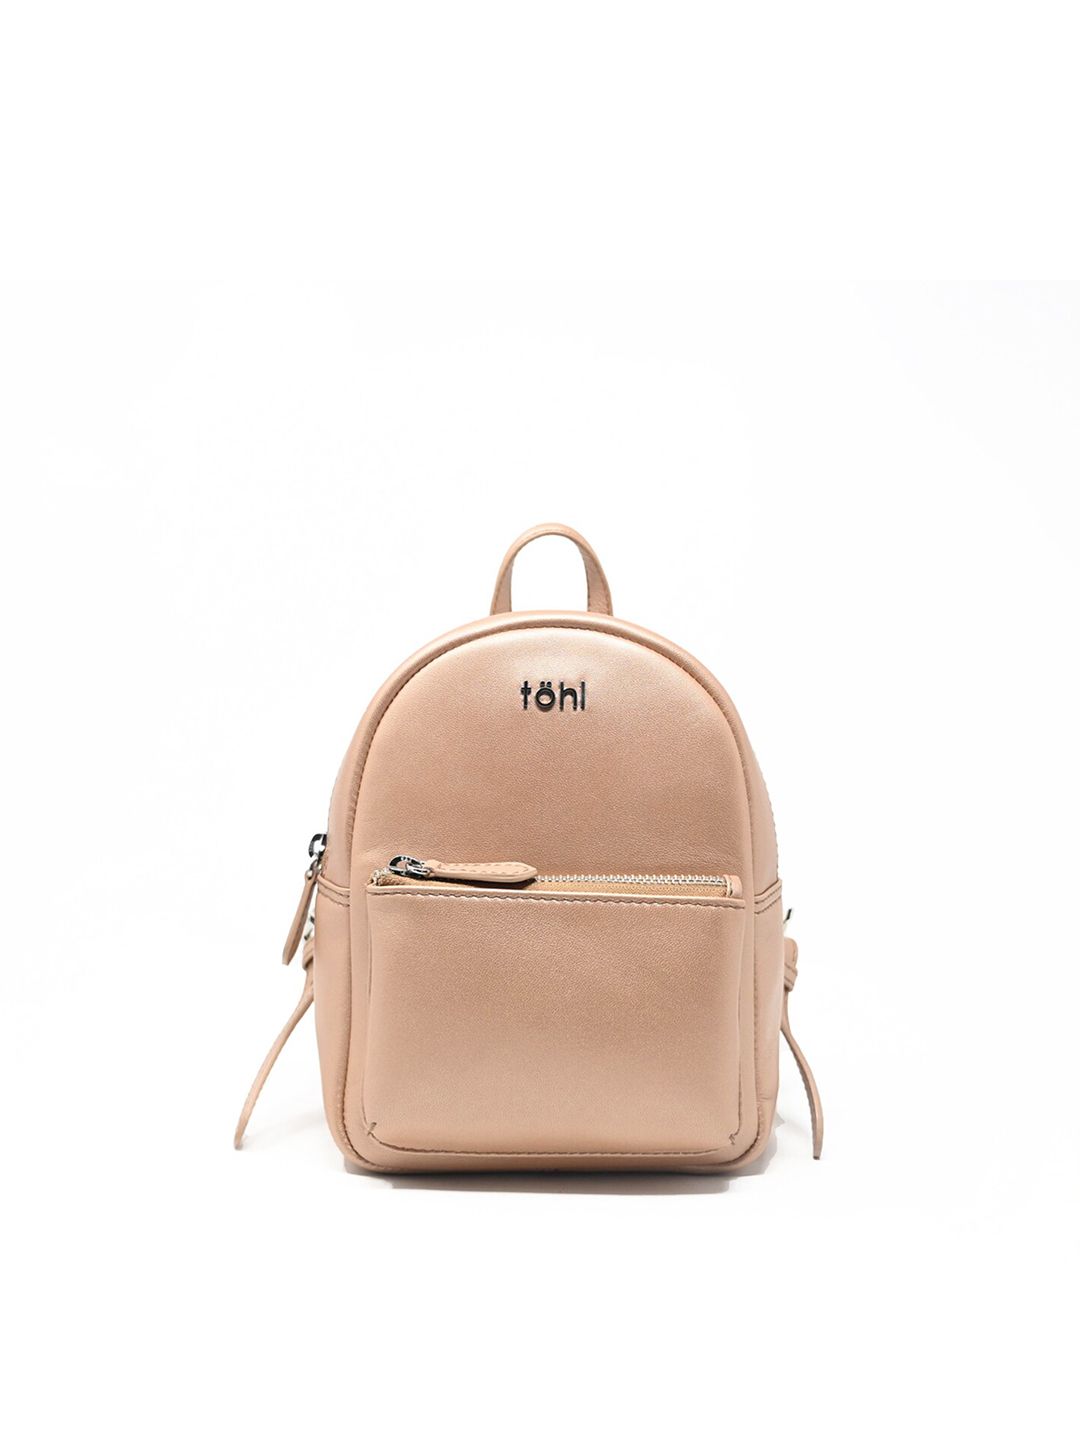 tohl Women Nude Backpack Price in India